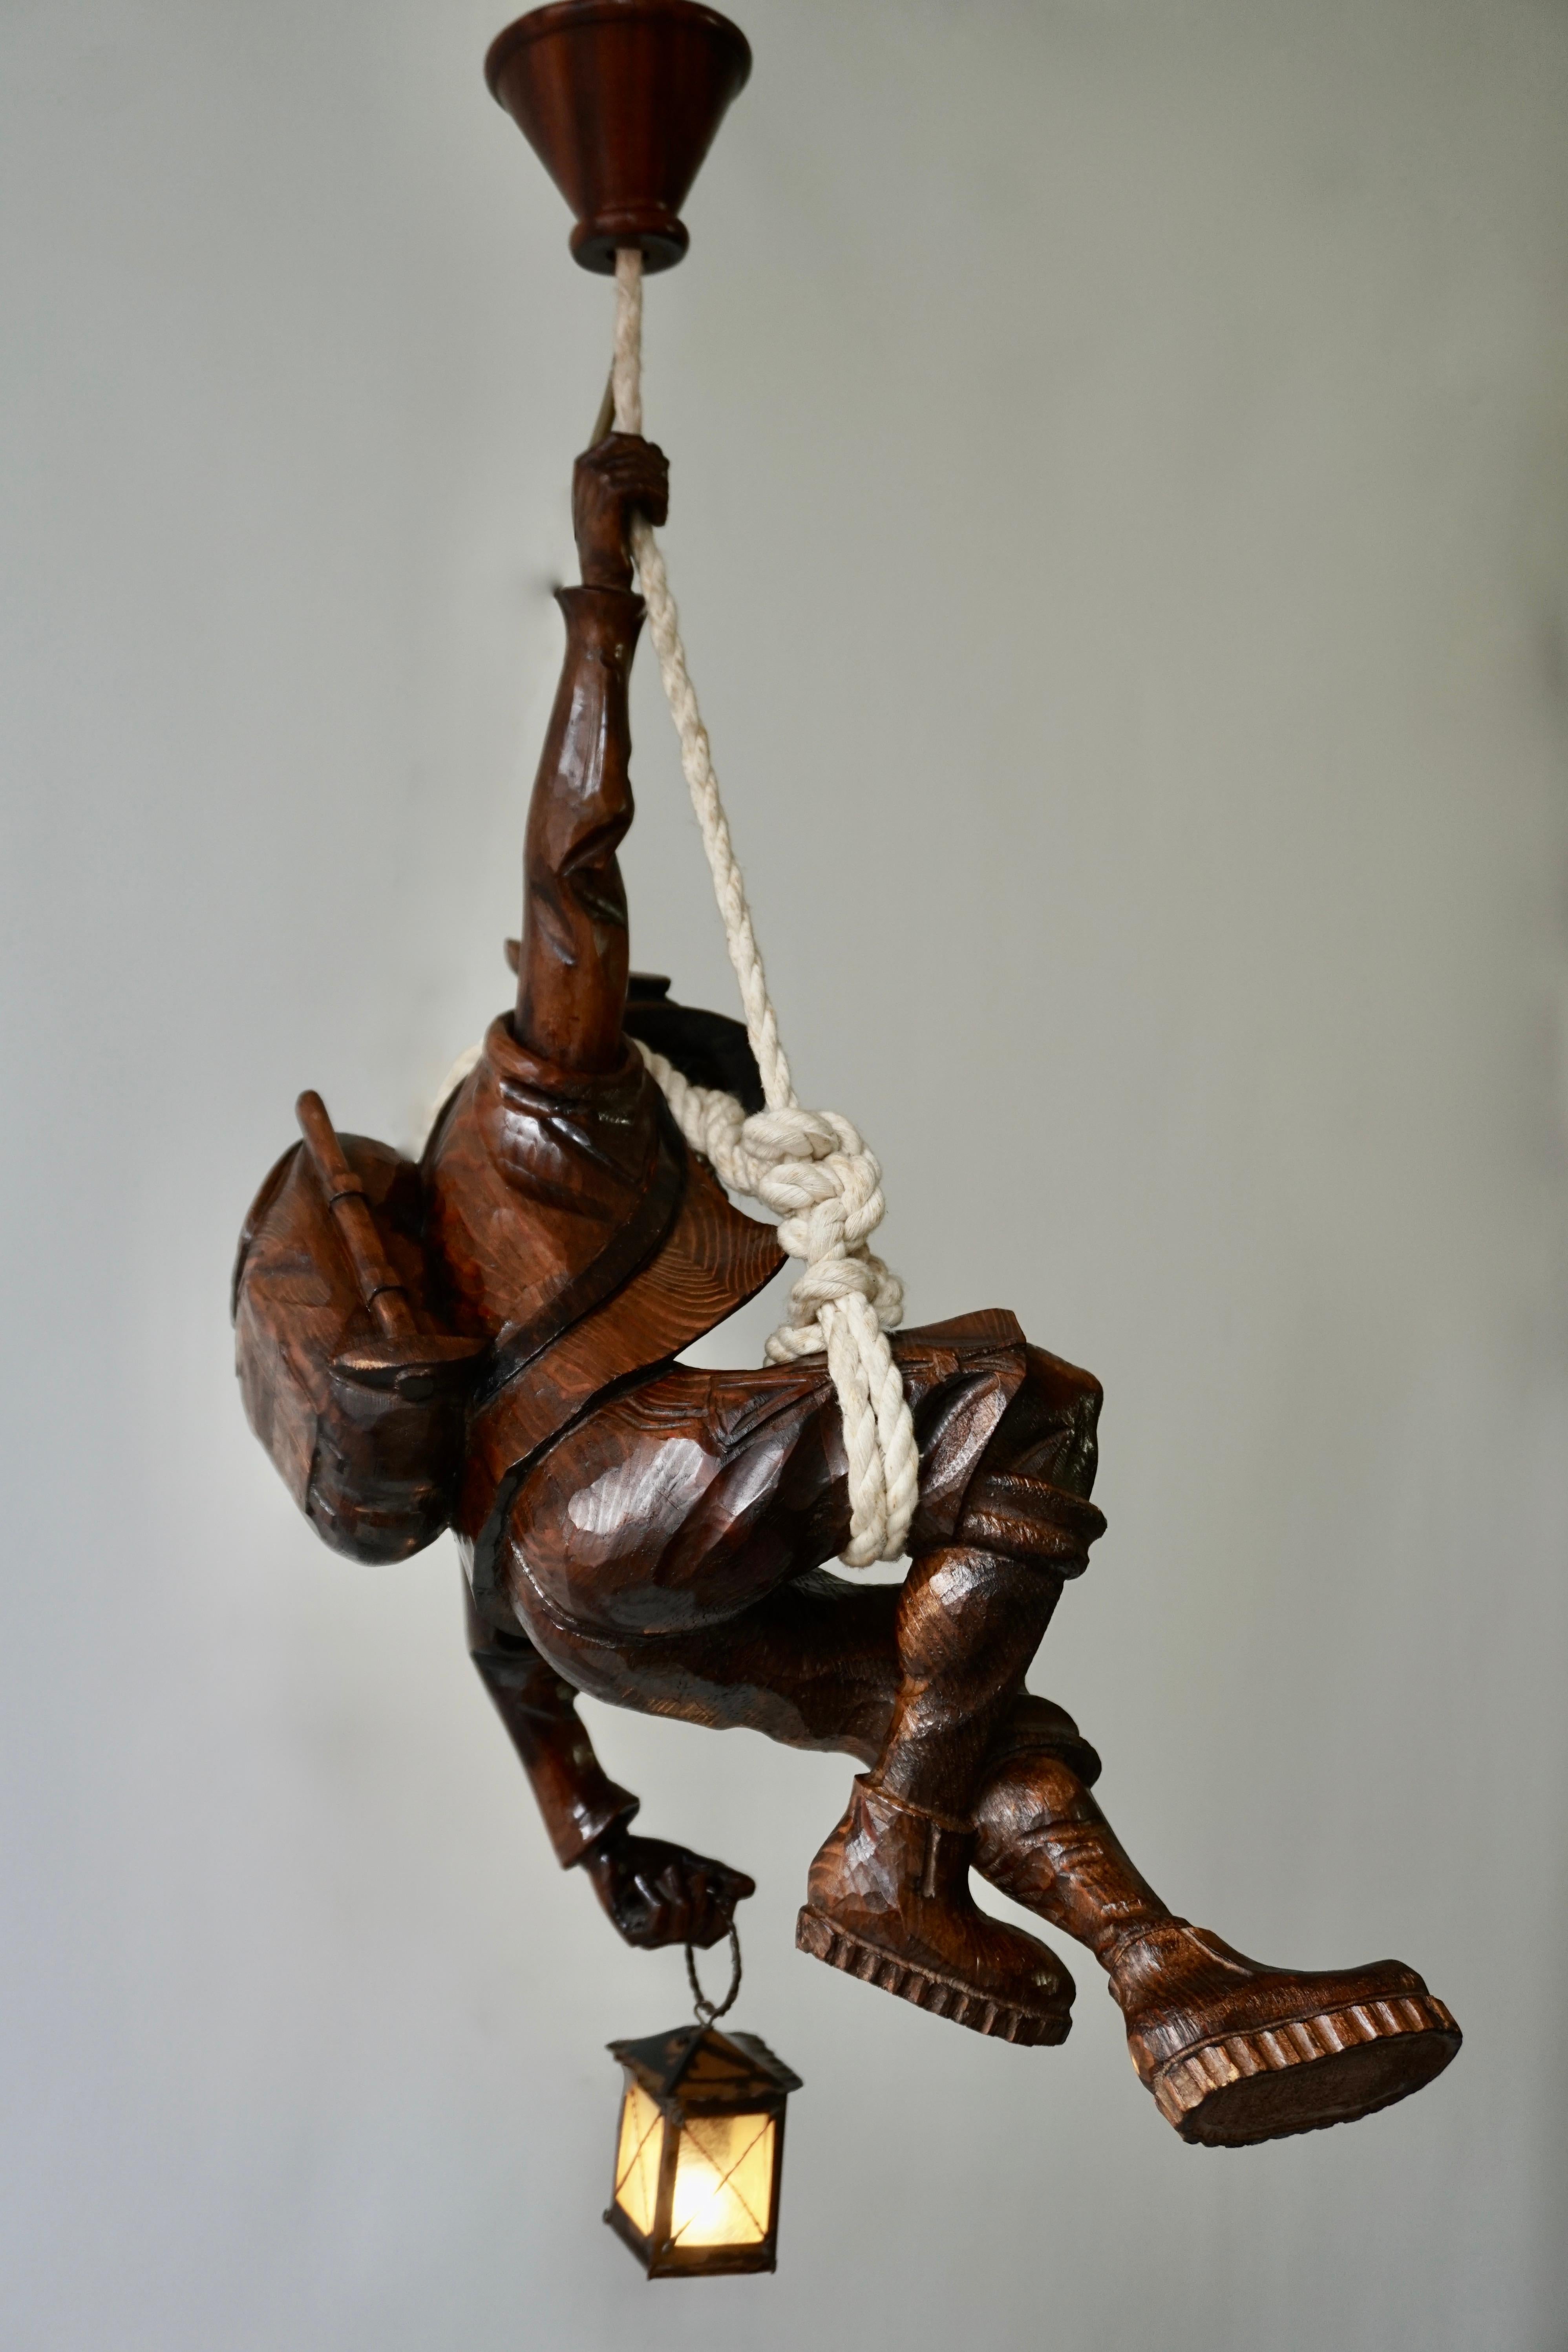 Stunning very rare hand carved Black Forest style wood mountain climber lantern or ceiling light. Pendant lamp off a mountain climber hanging from a rope with a lantern in his hand.
The light requires one single E14 screw fit lightbulb (40Watt